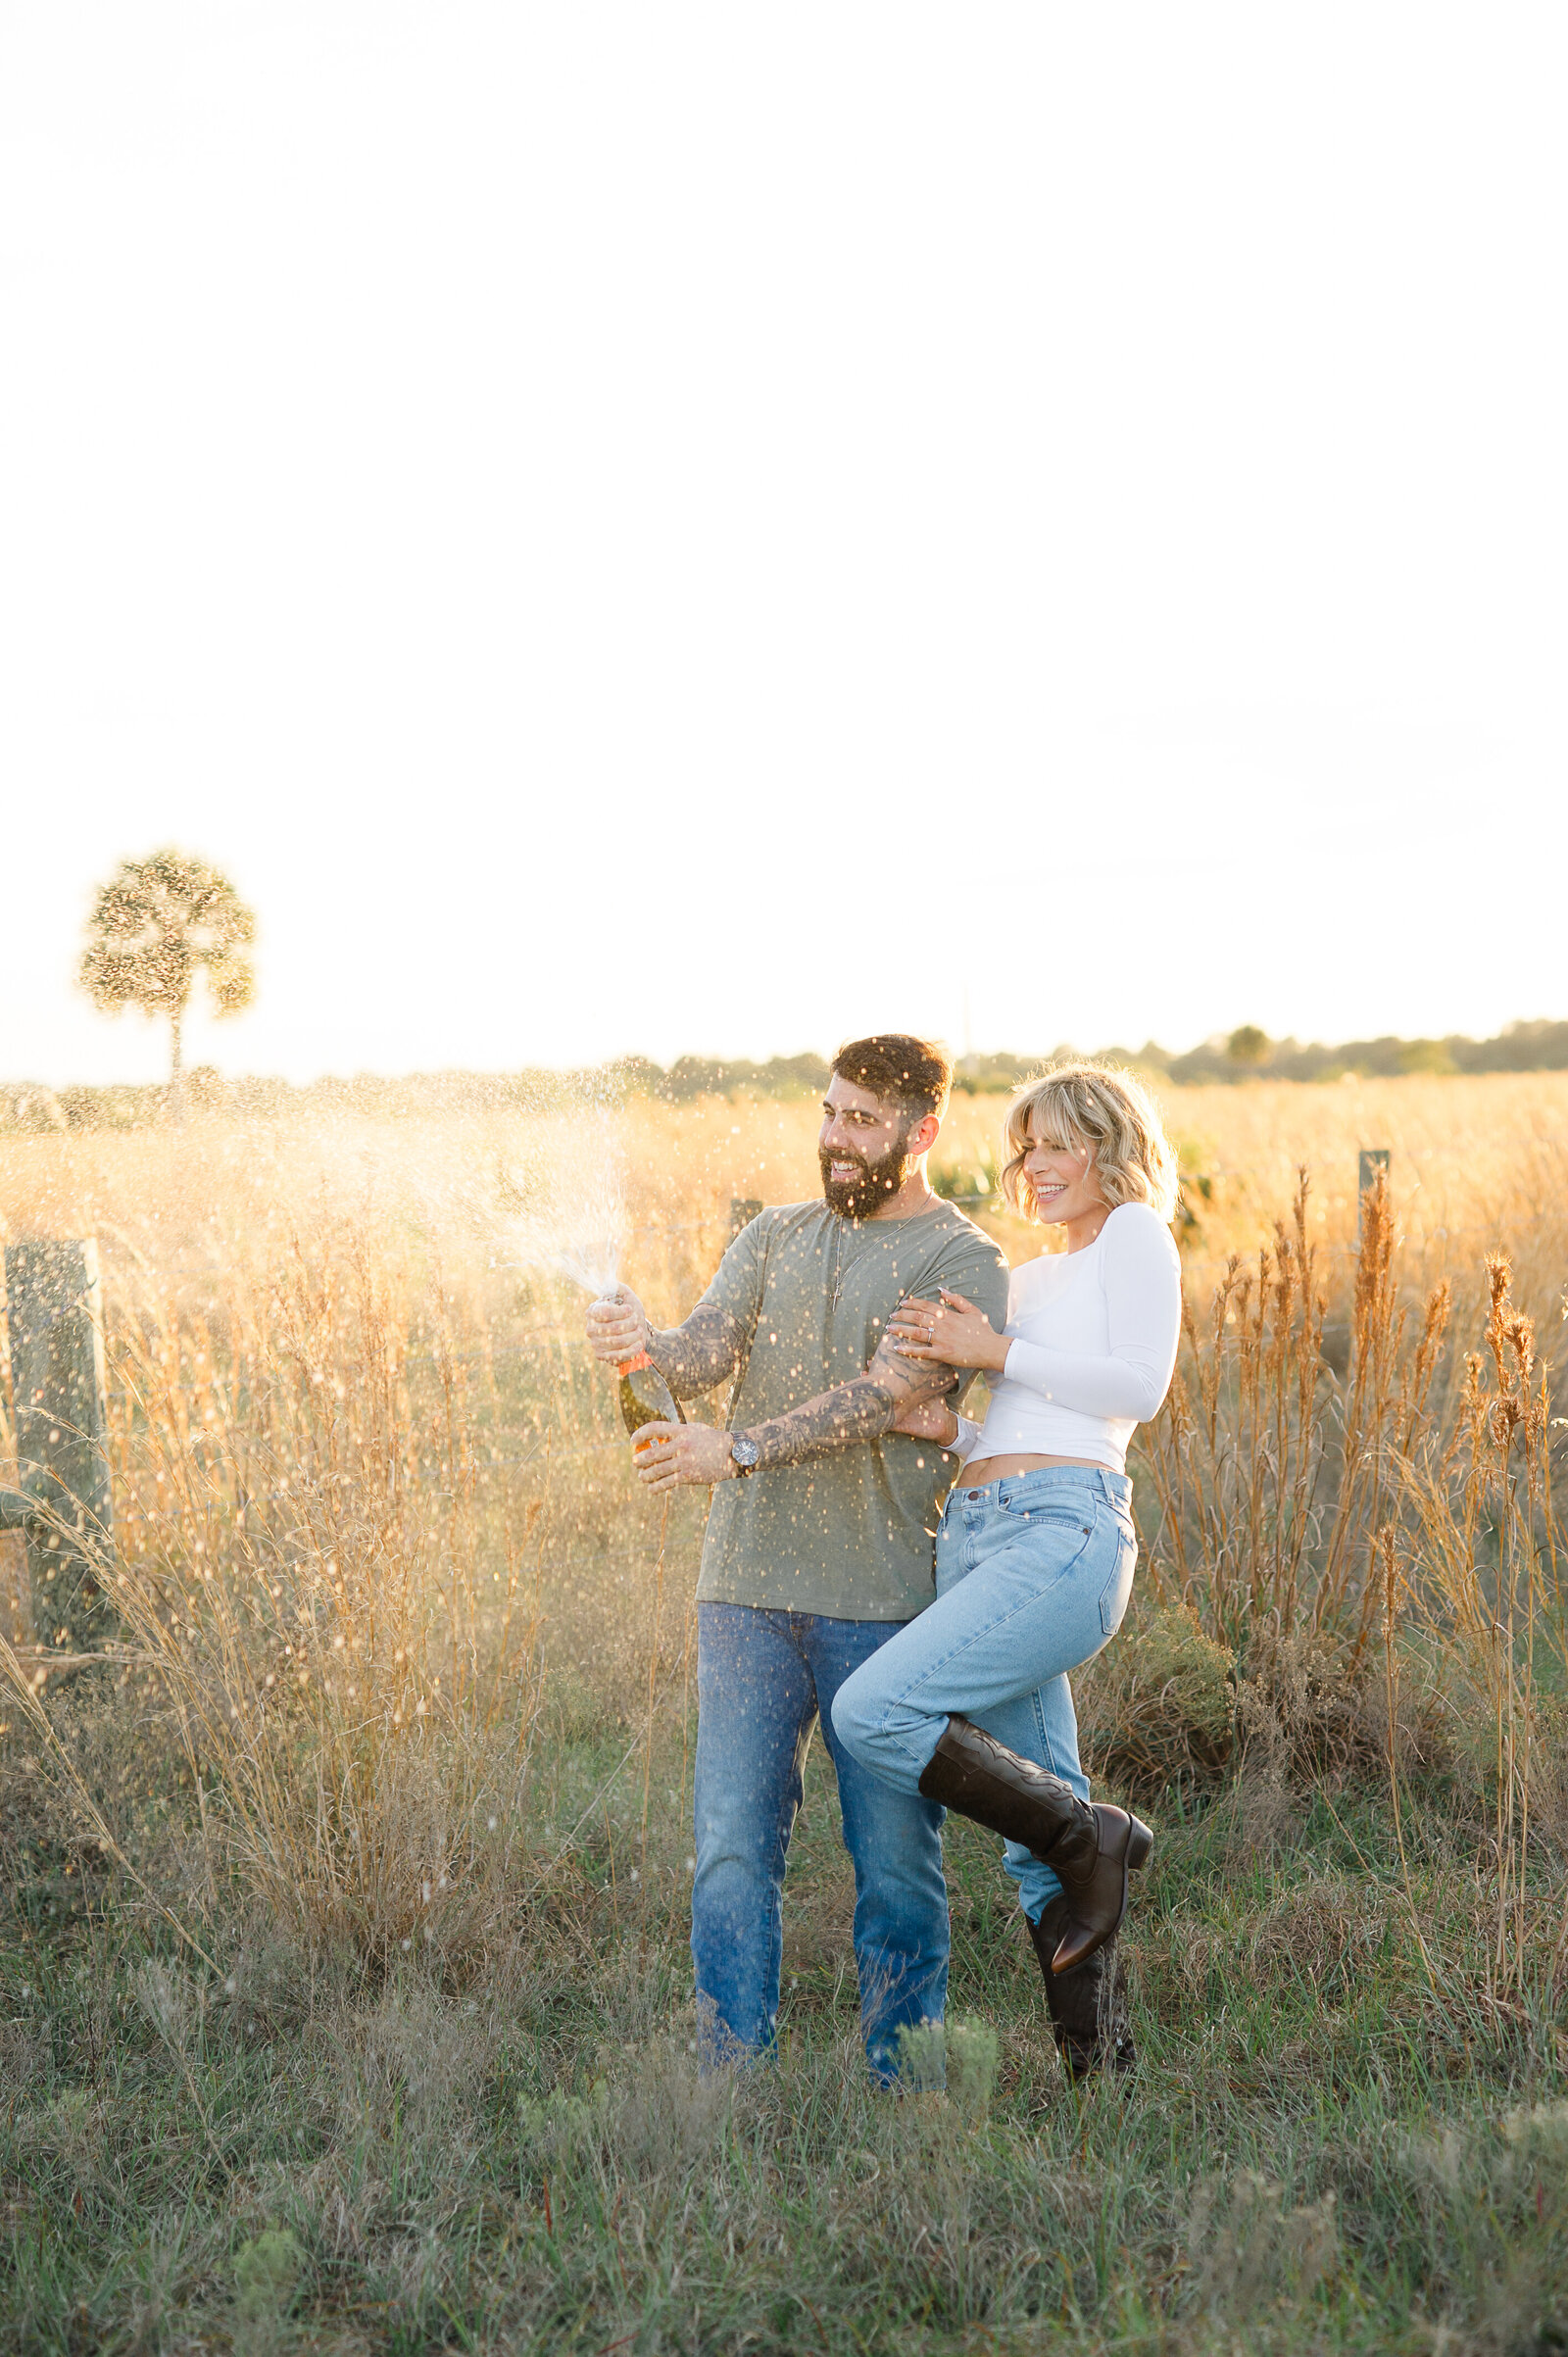 Newly engaged couple pops a bottle of champagne in a field during their engagement photo session